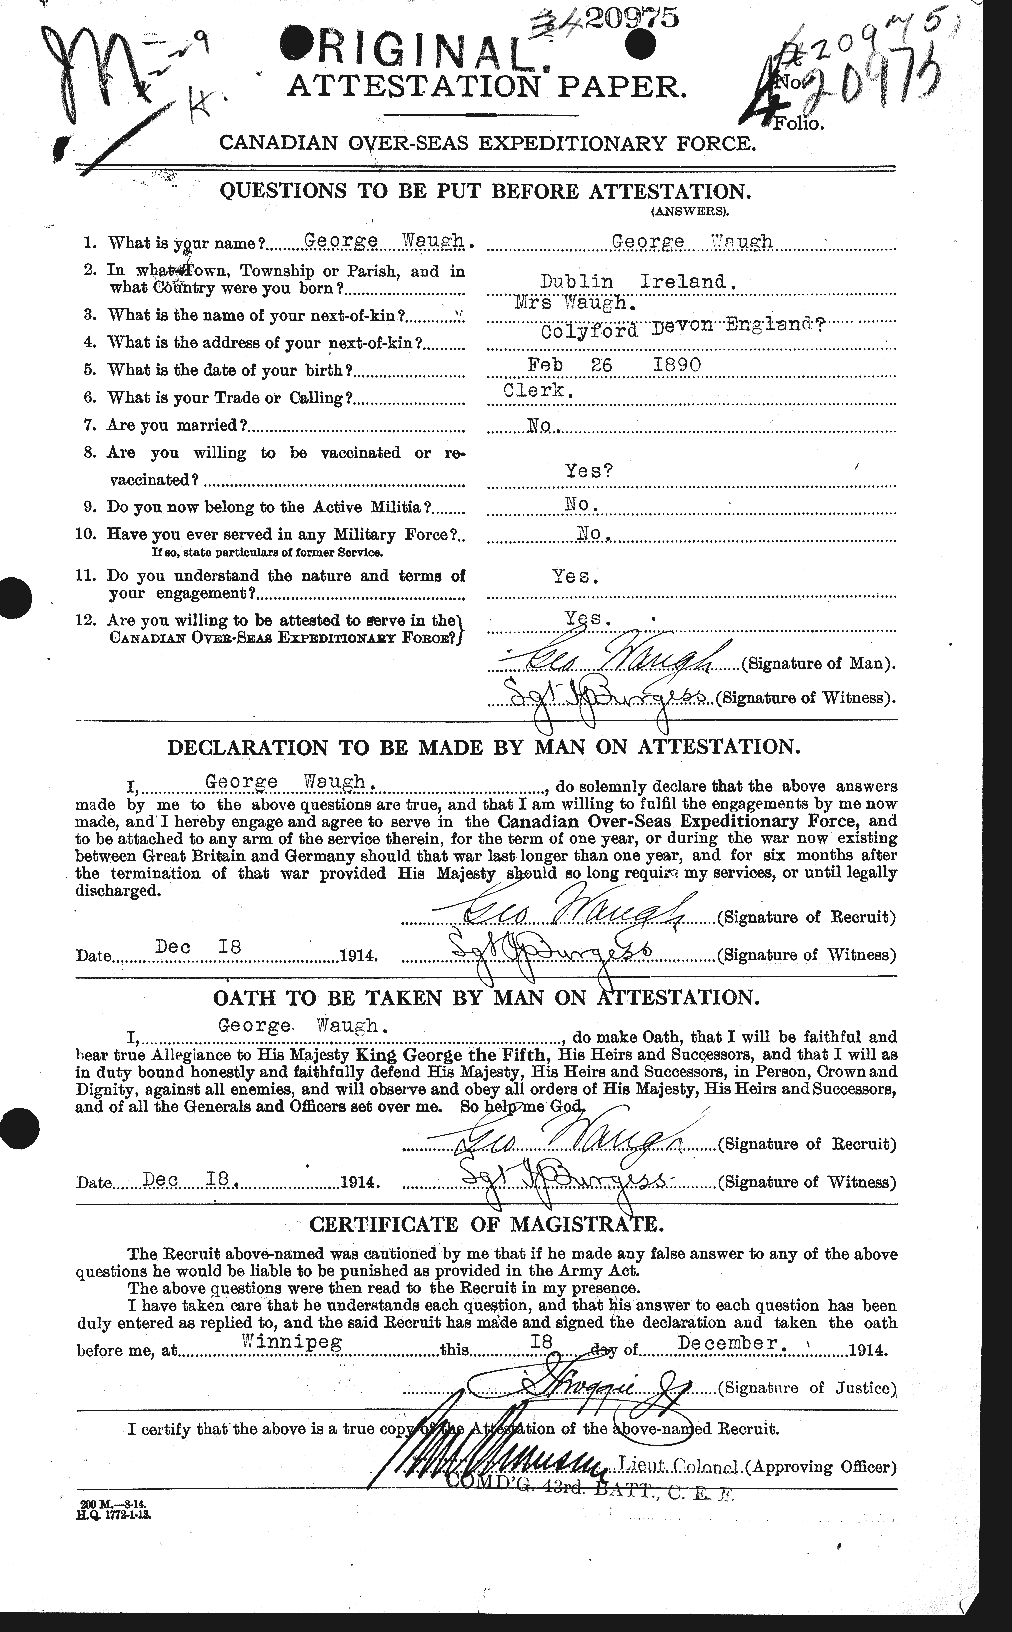 Personnel Records of the First World War - CEF 662991a